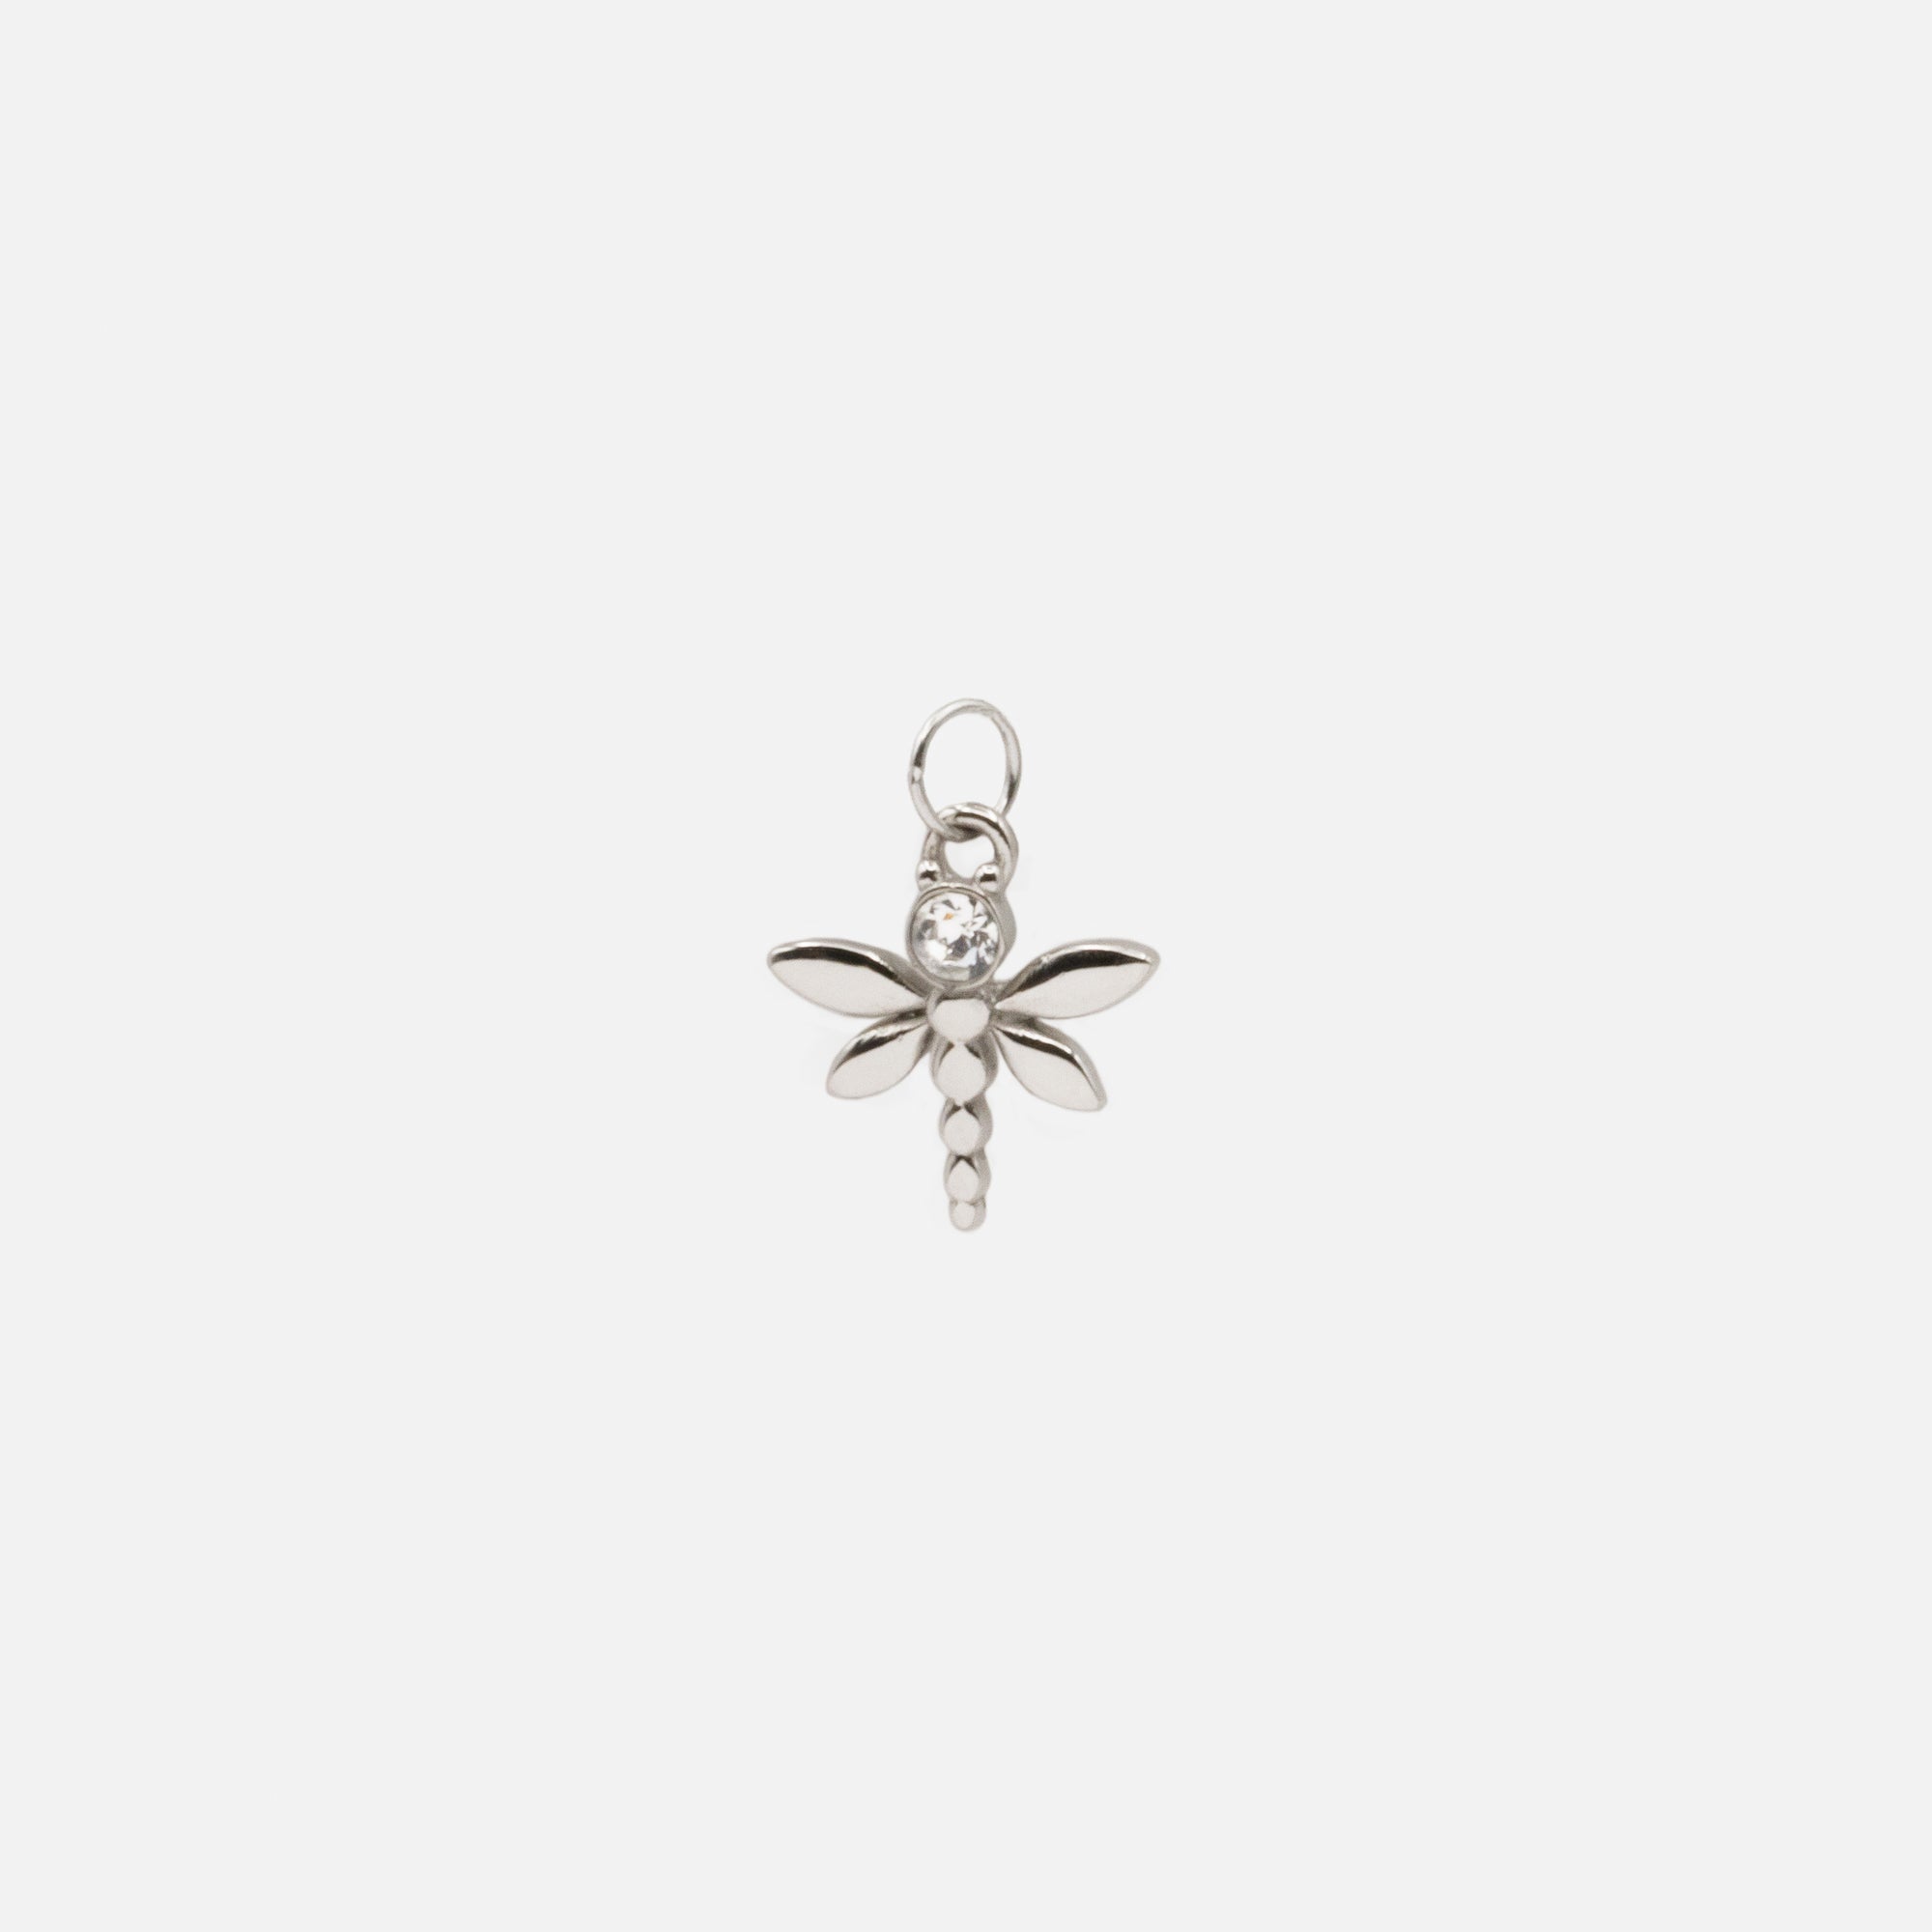 Dragonfly silvered charm in stainless steel